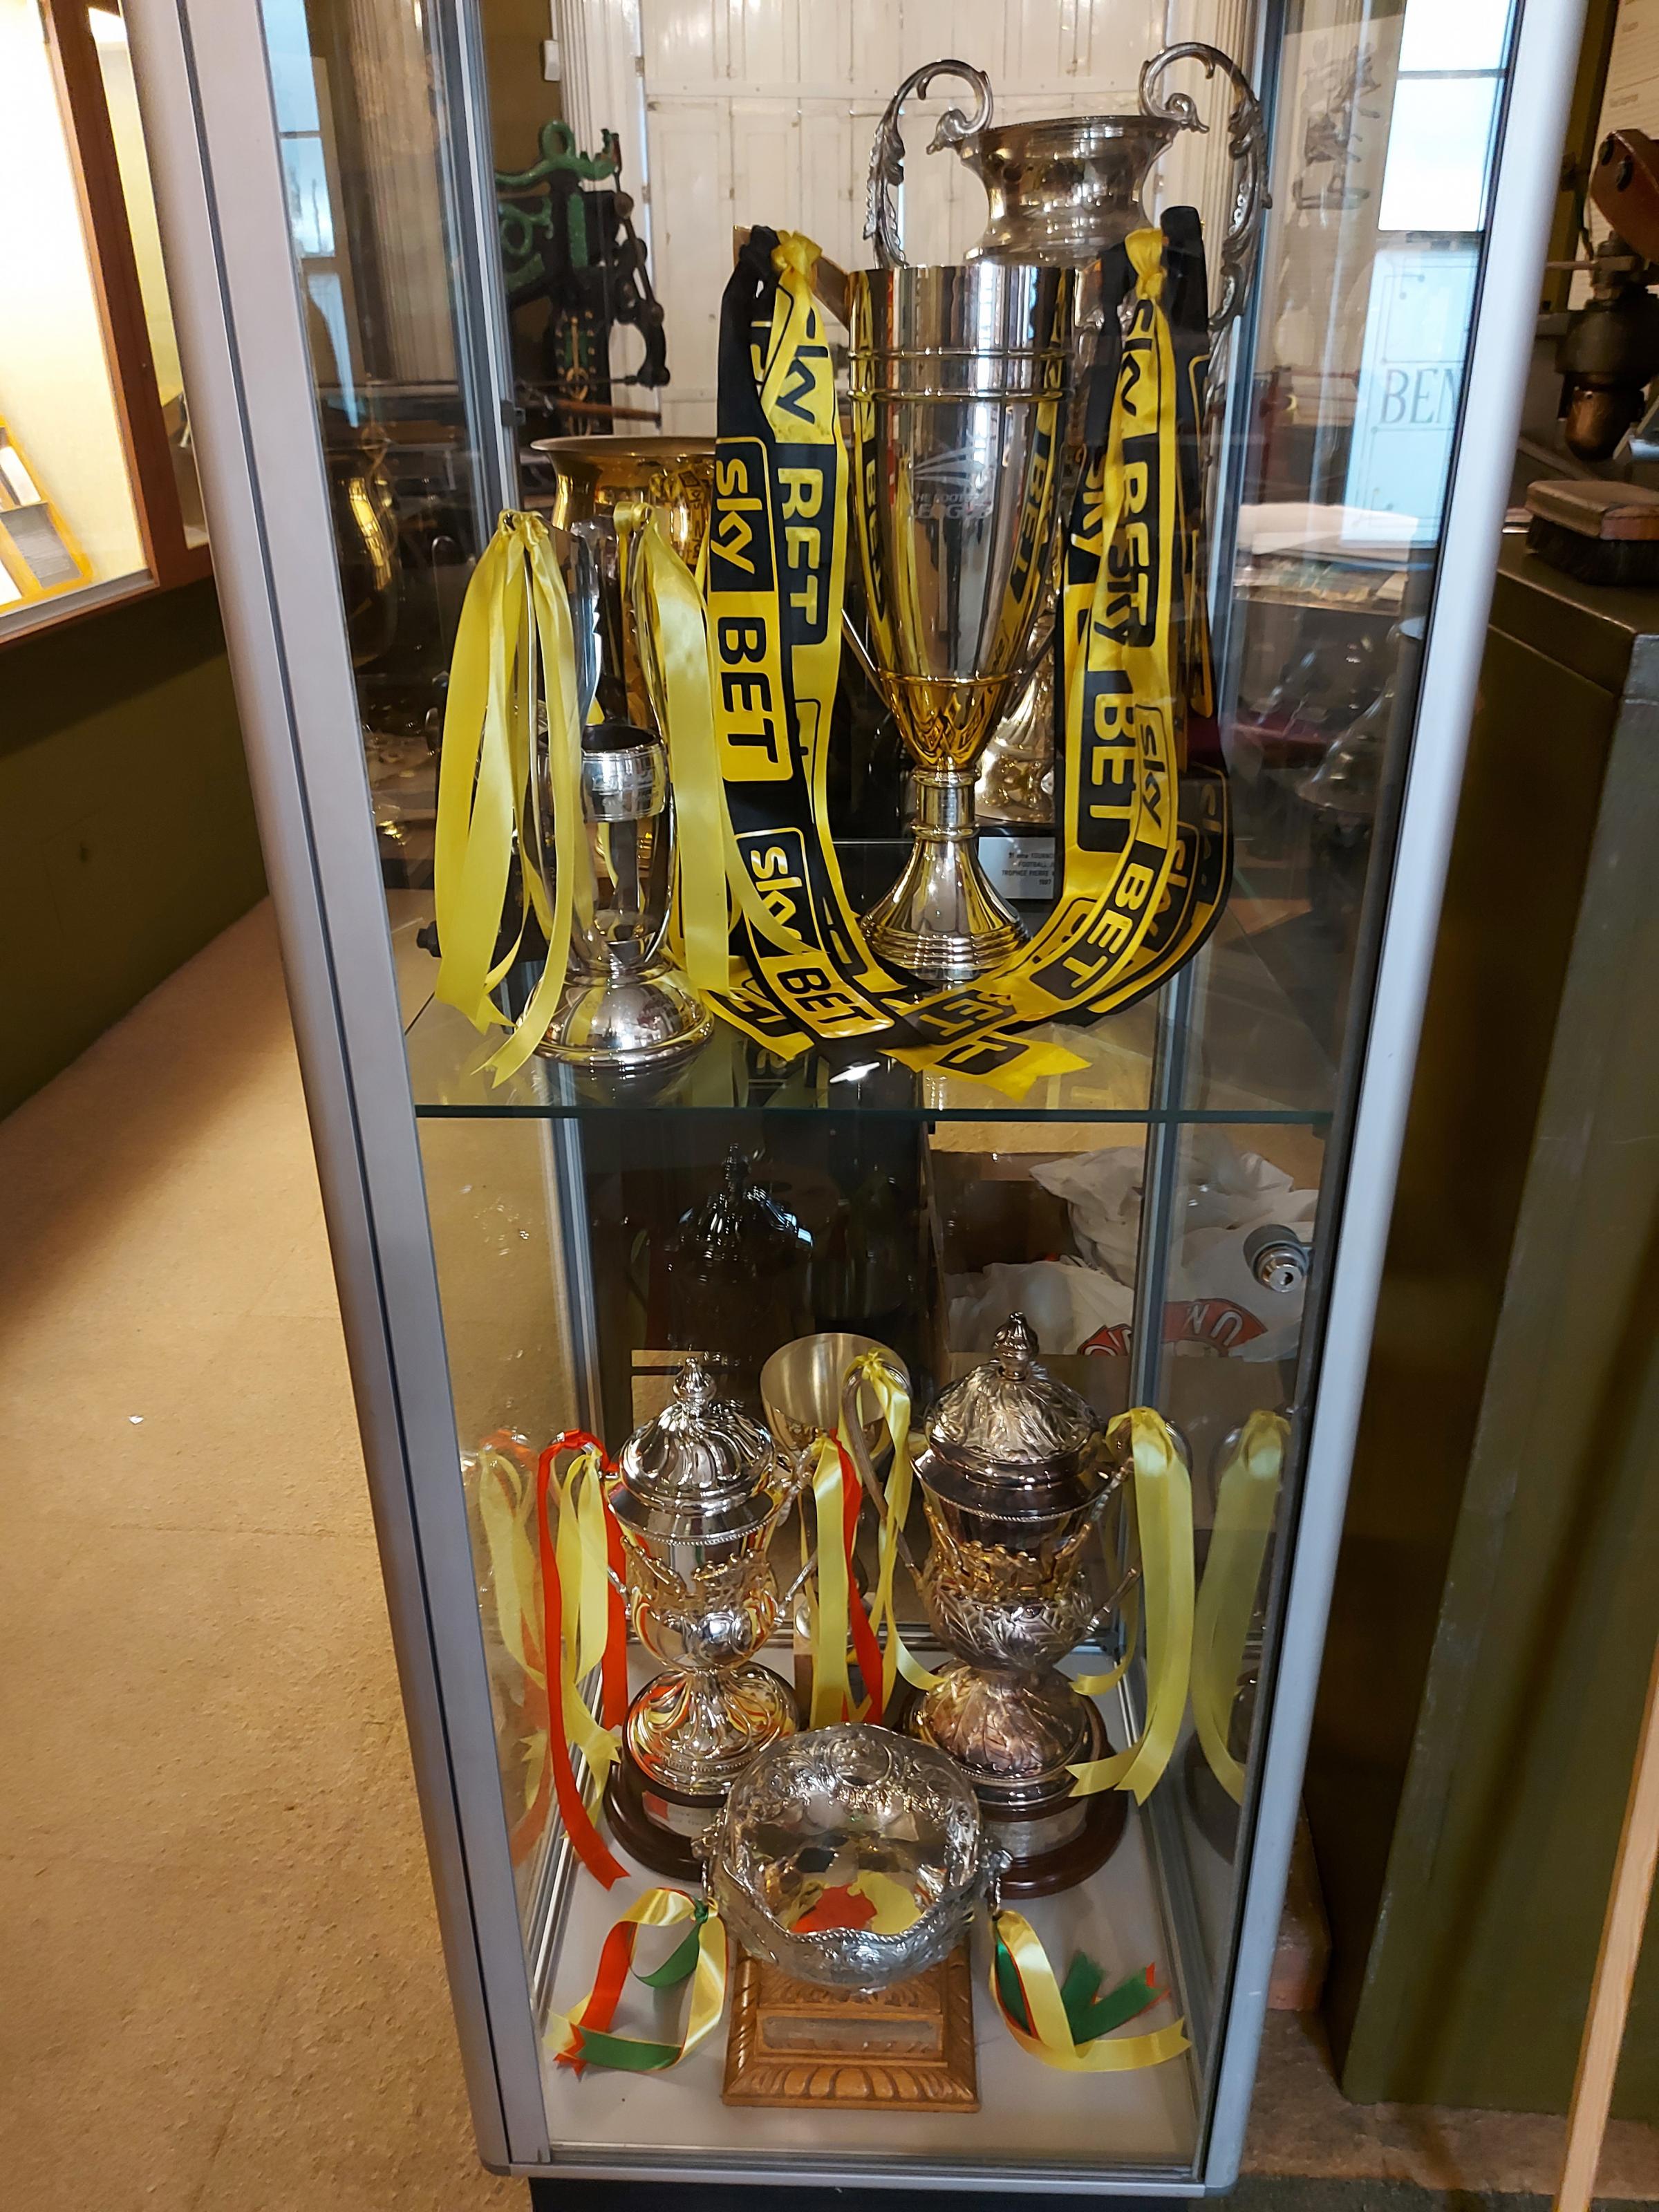 The display of Watfords promotion trophies